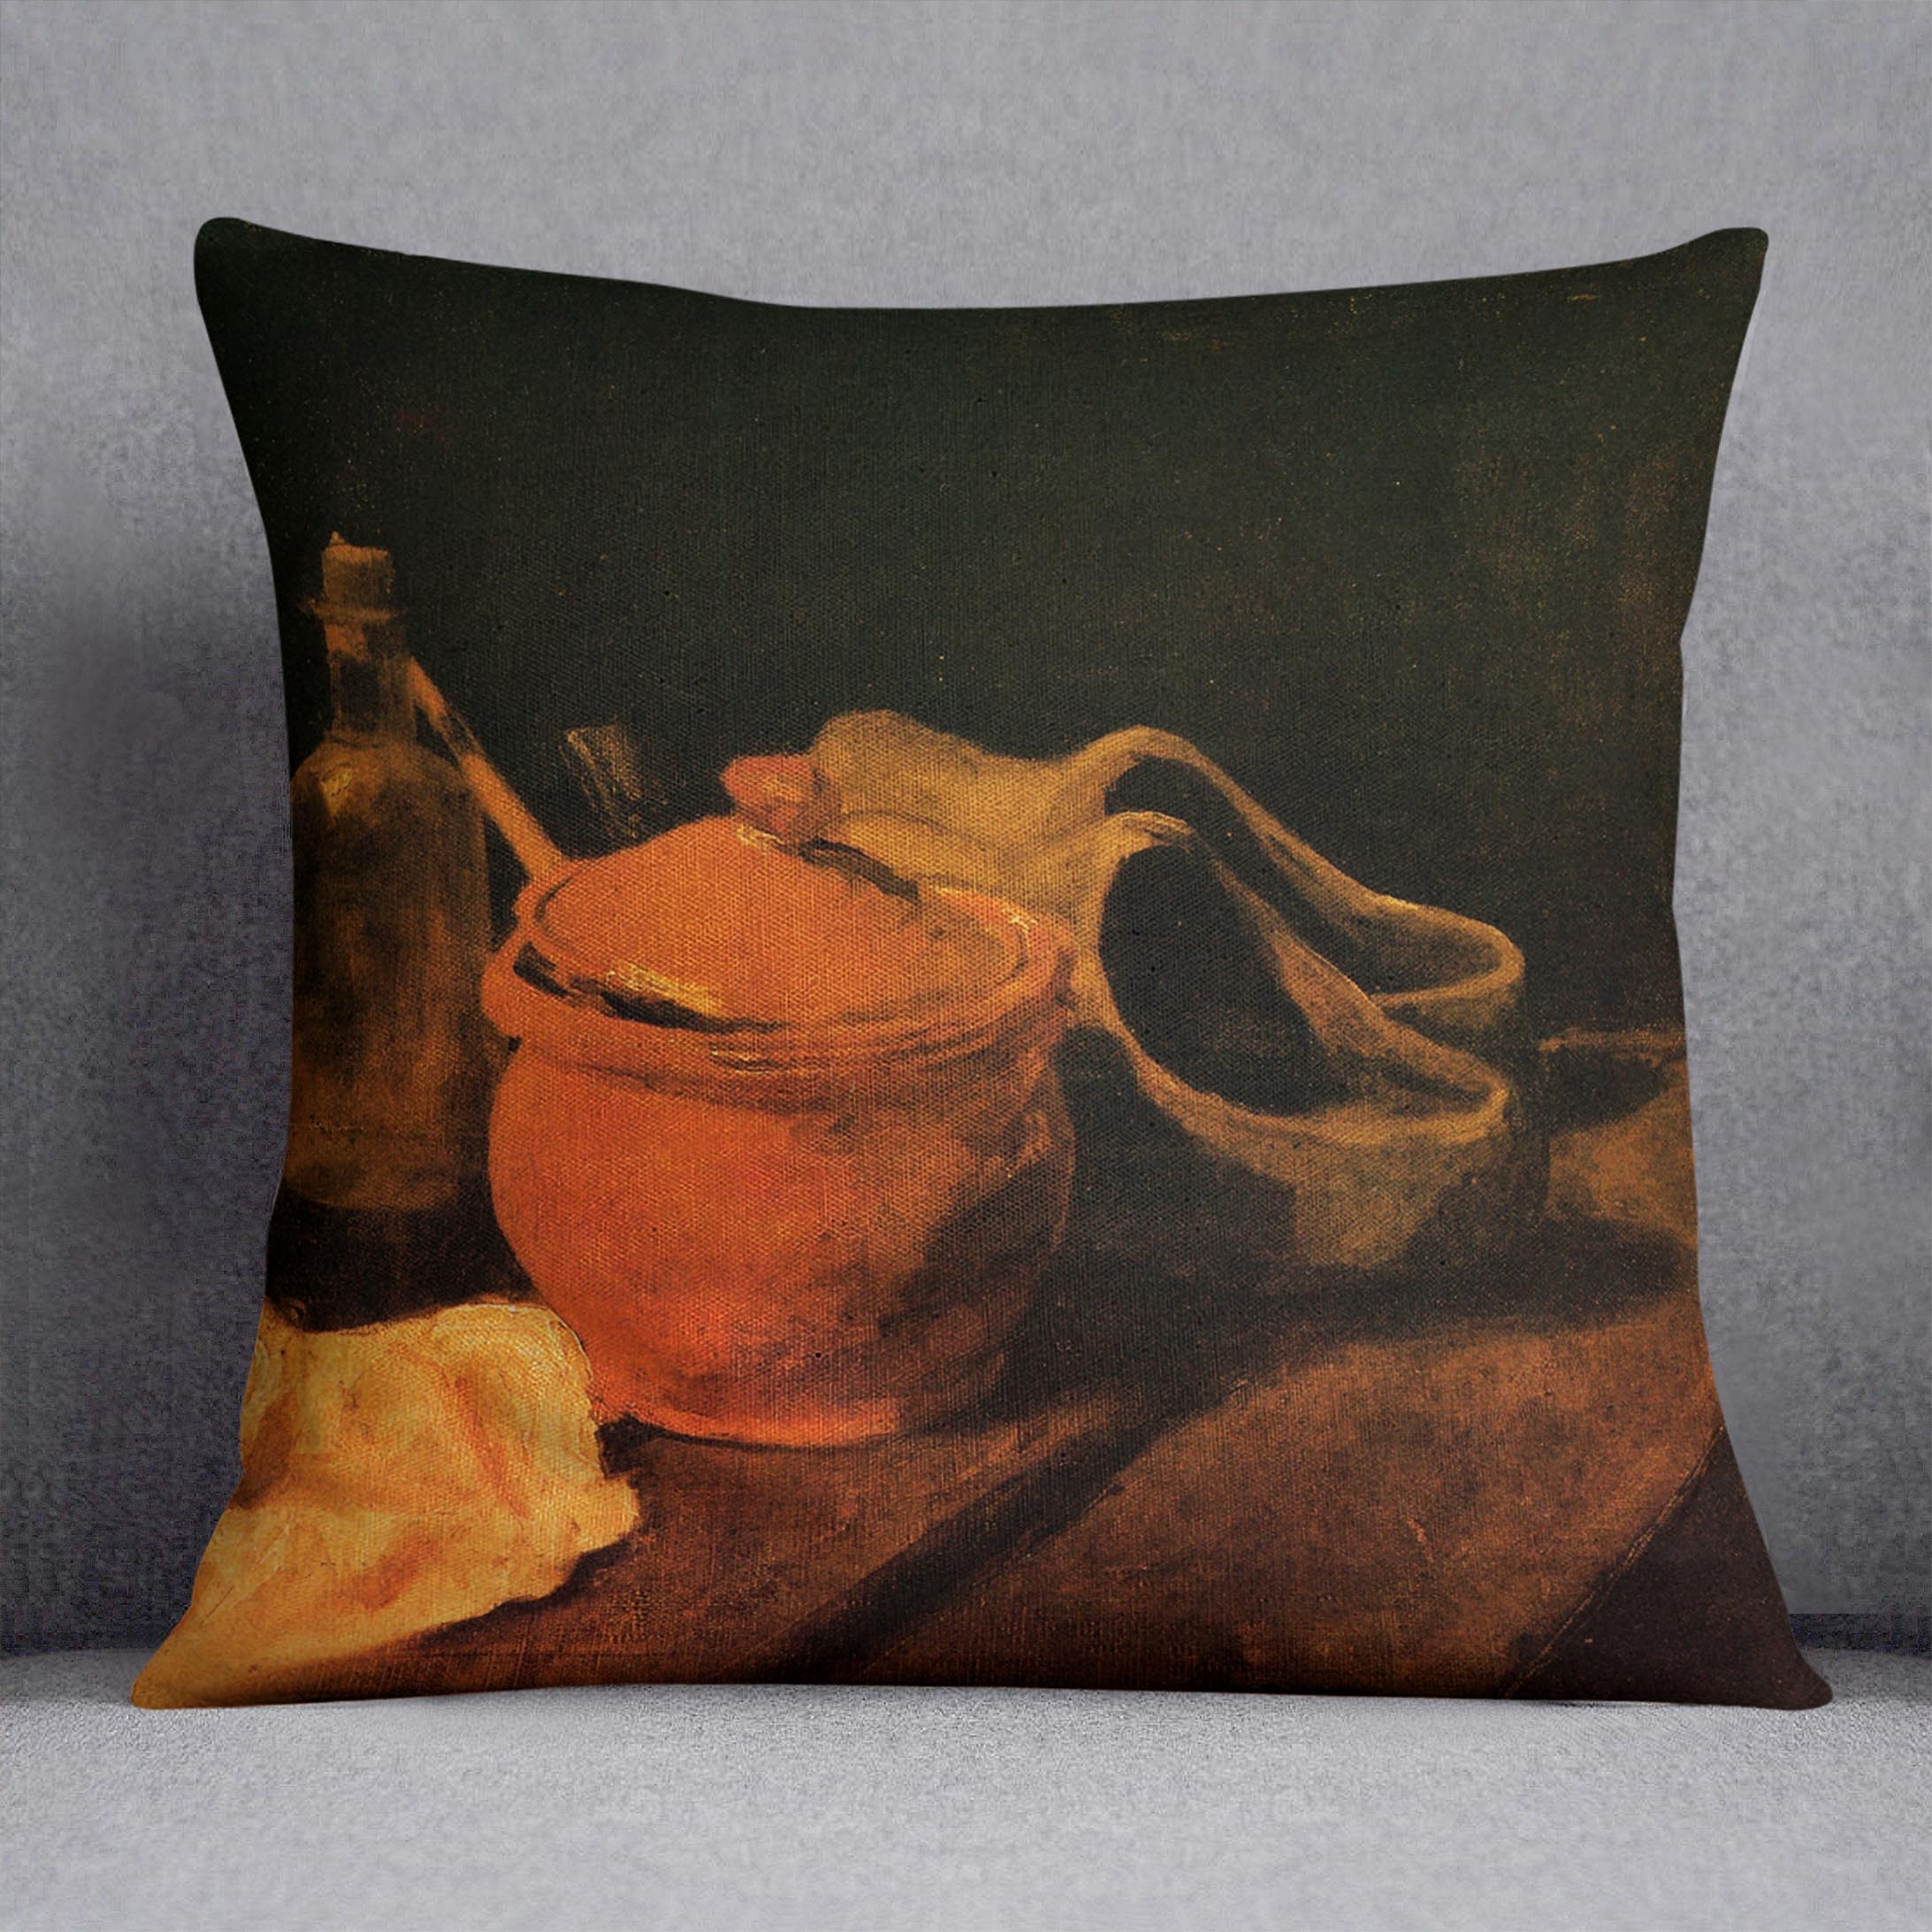 Still Life with Earthenware Bottle and Clogs by Van Gogh Cushion